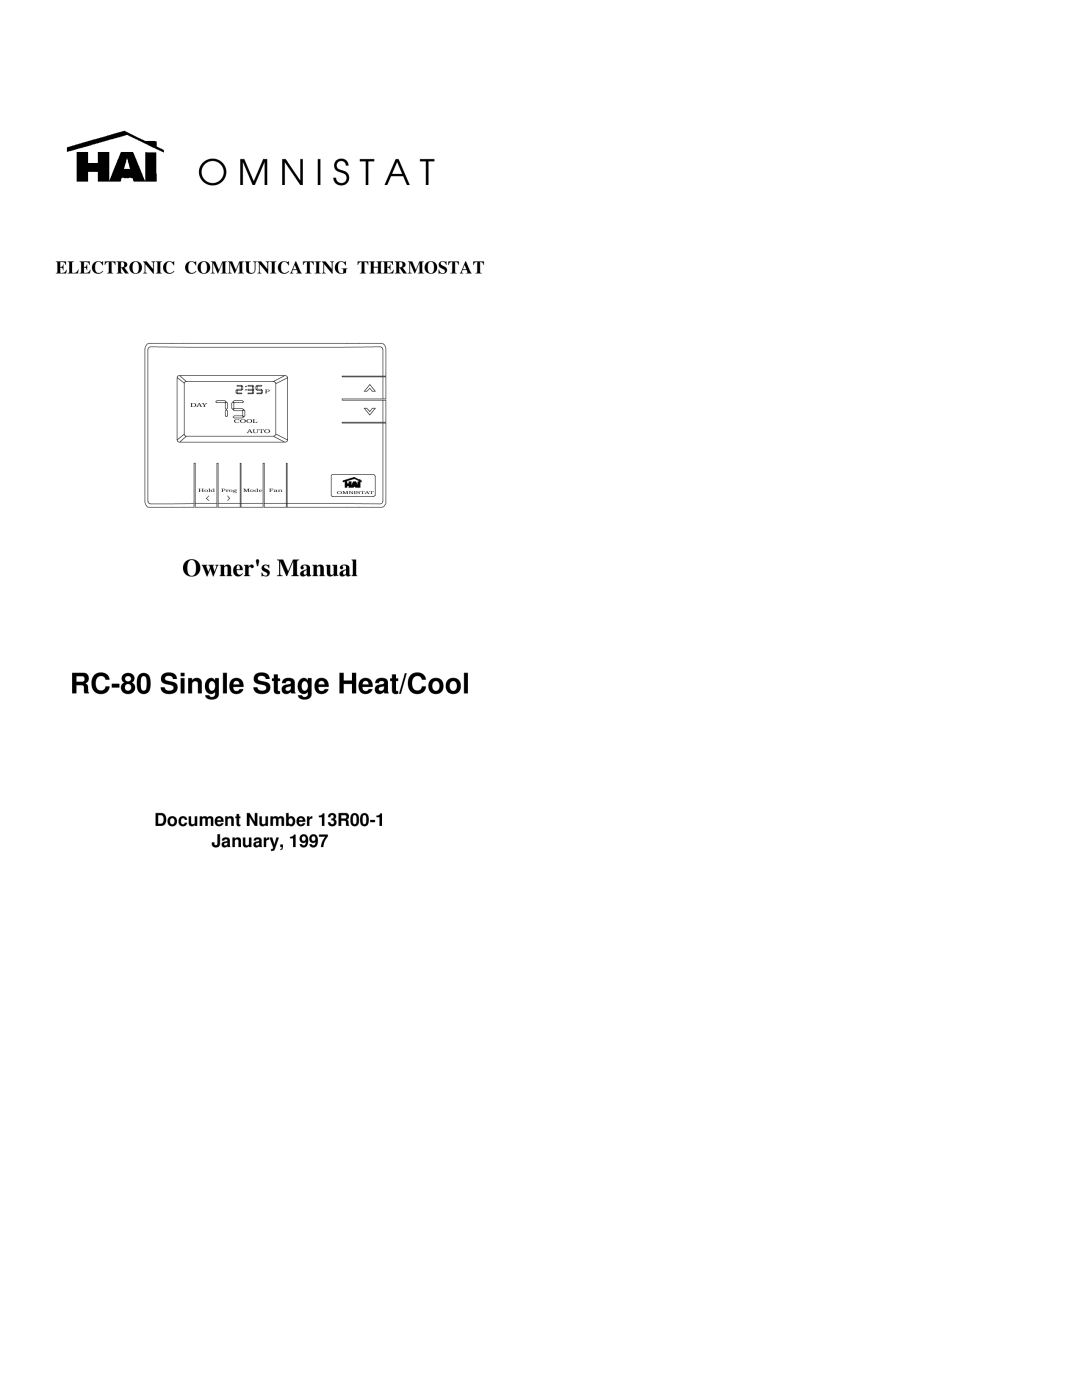 Home Automation owner manual O M N I S T A T, RC-80Single Stage Heat/Cool, Electronic Communicating Thermostat 